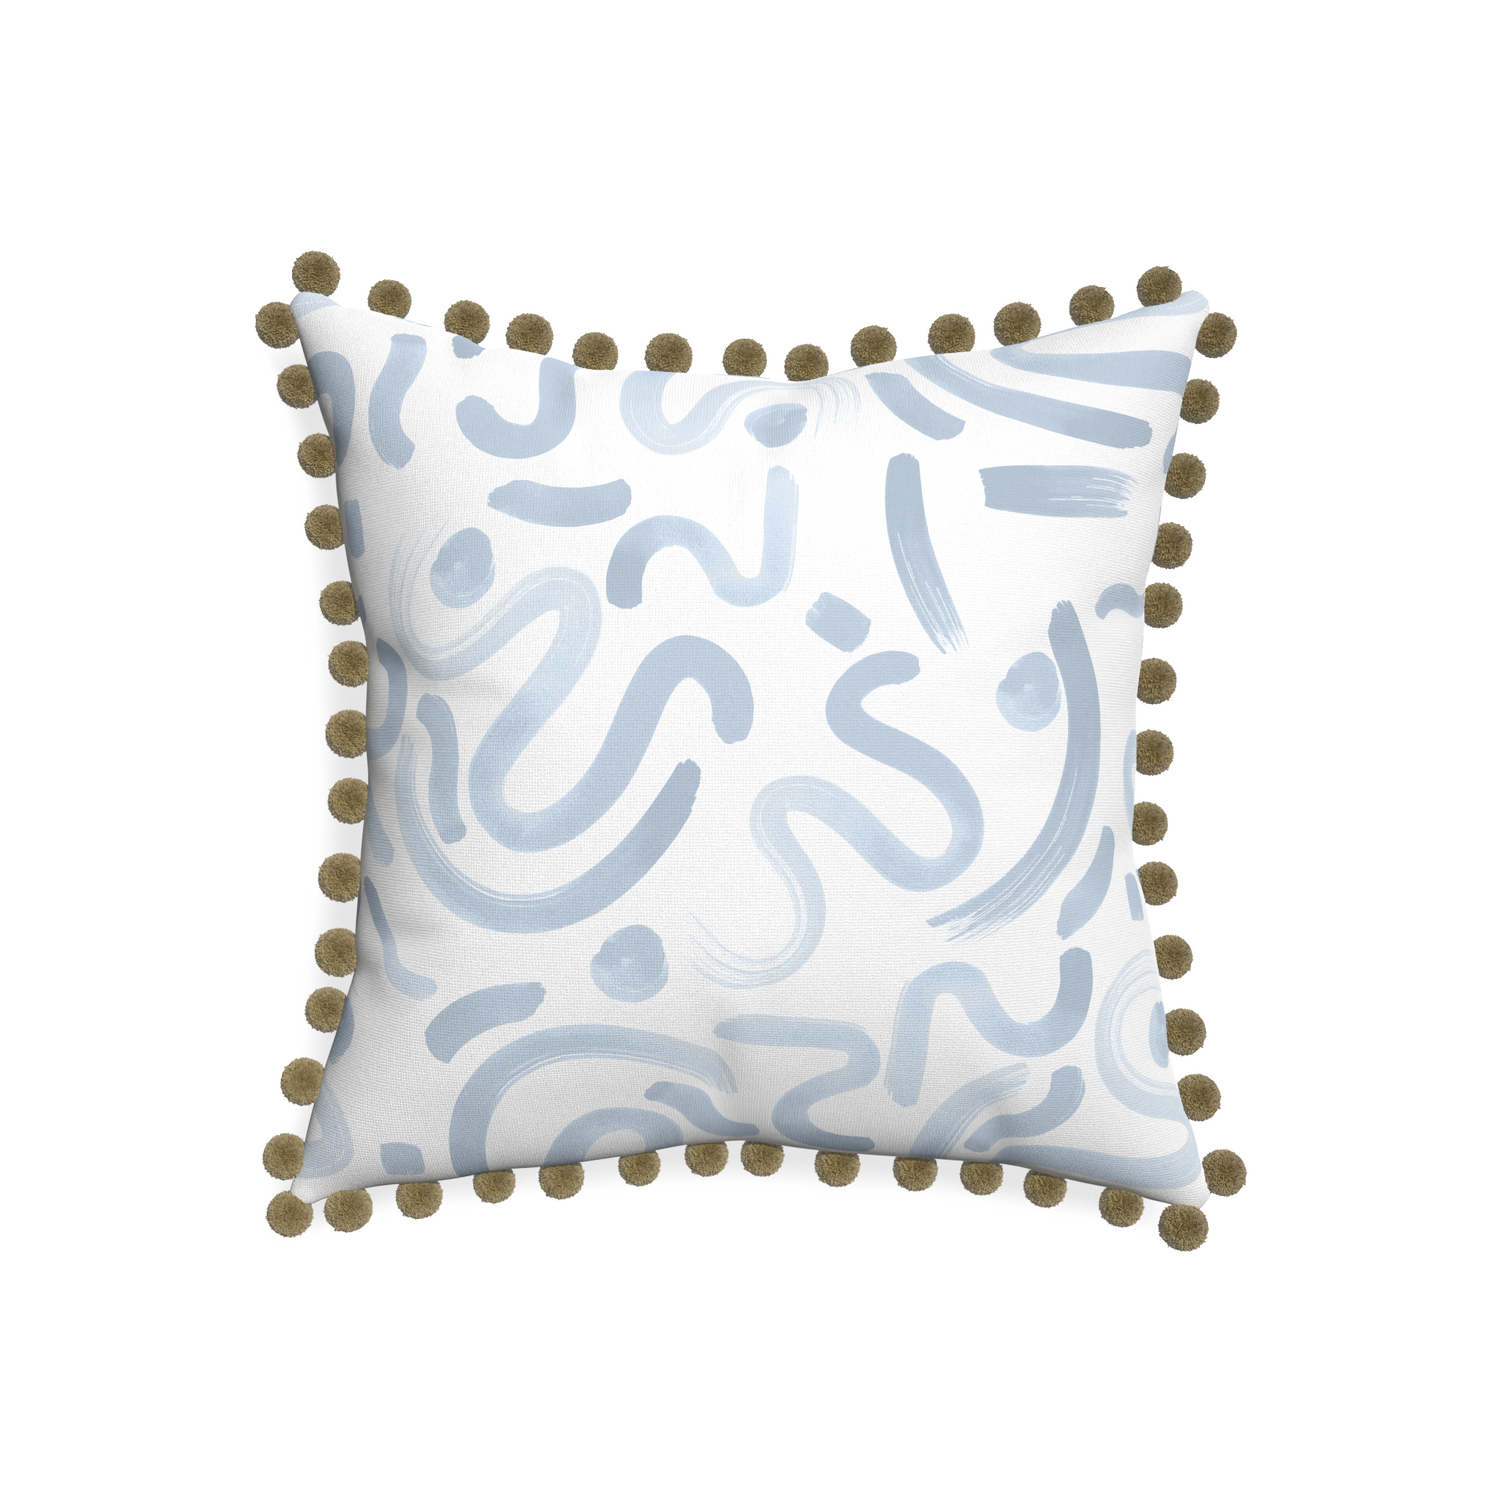 20-square hockney sky custom abstract sky bluepillow with olive pom pom on white background